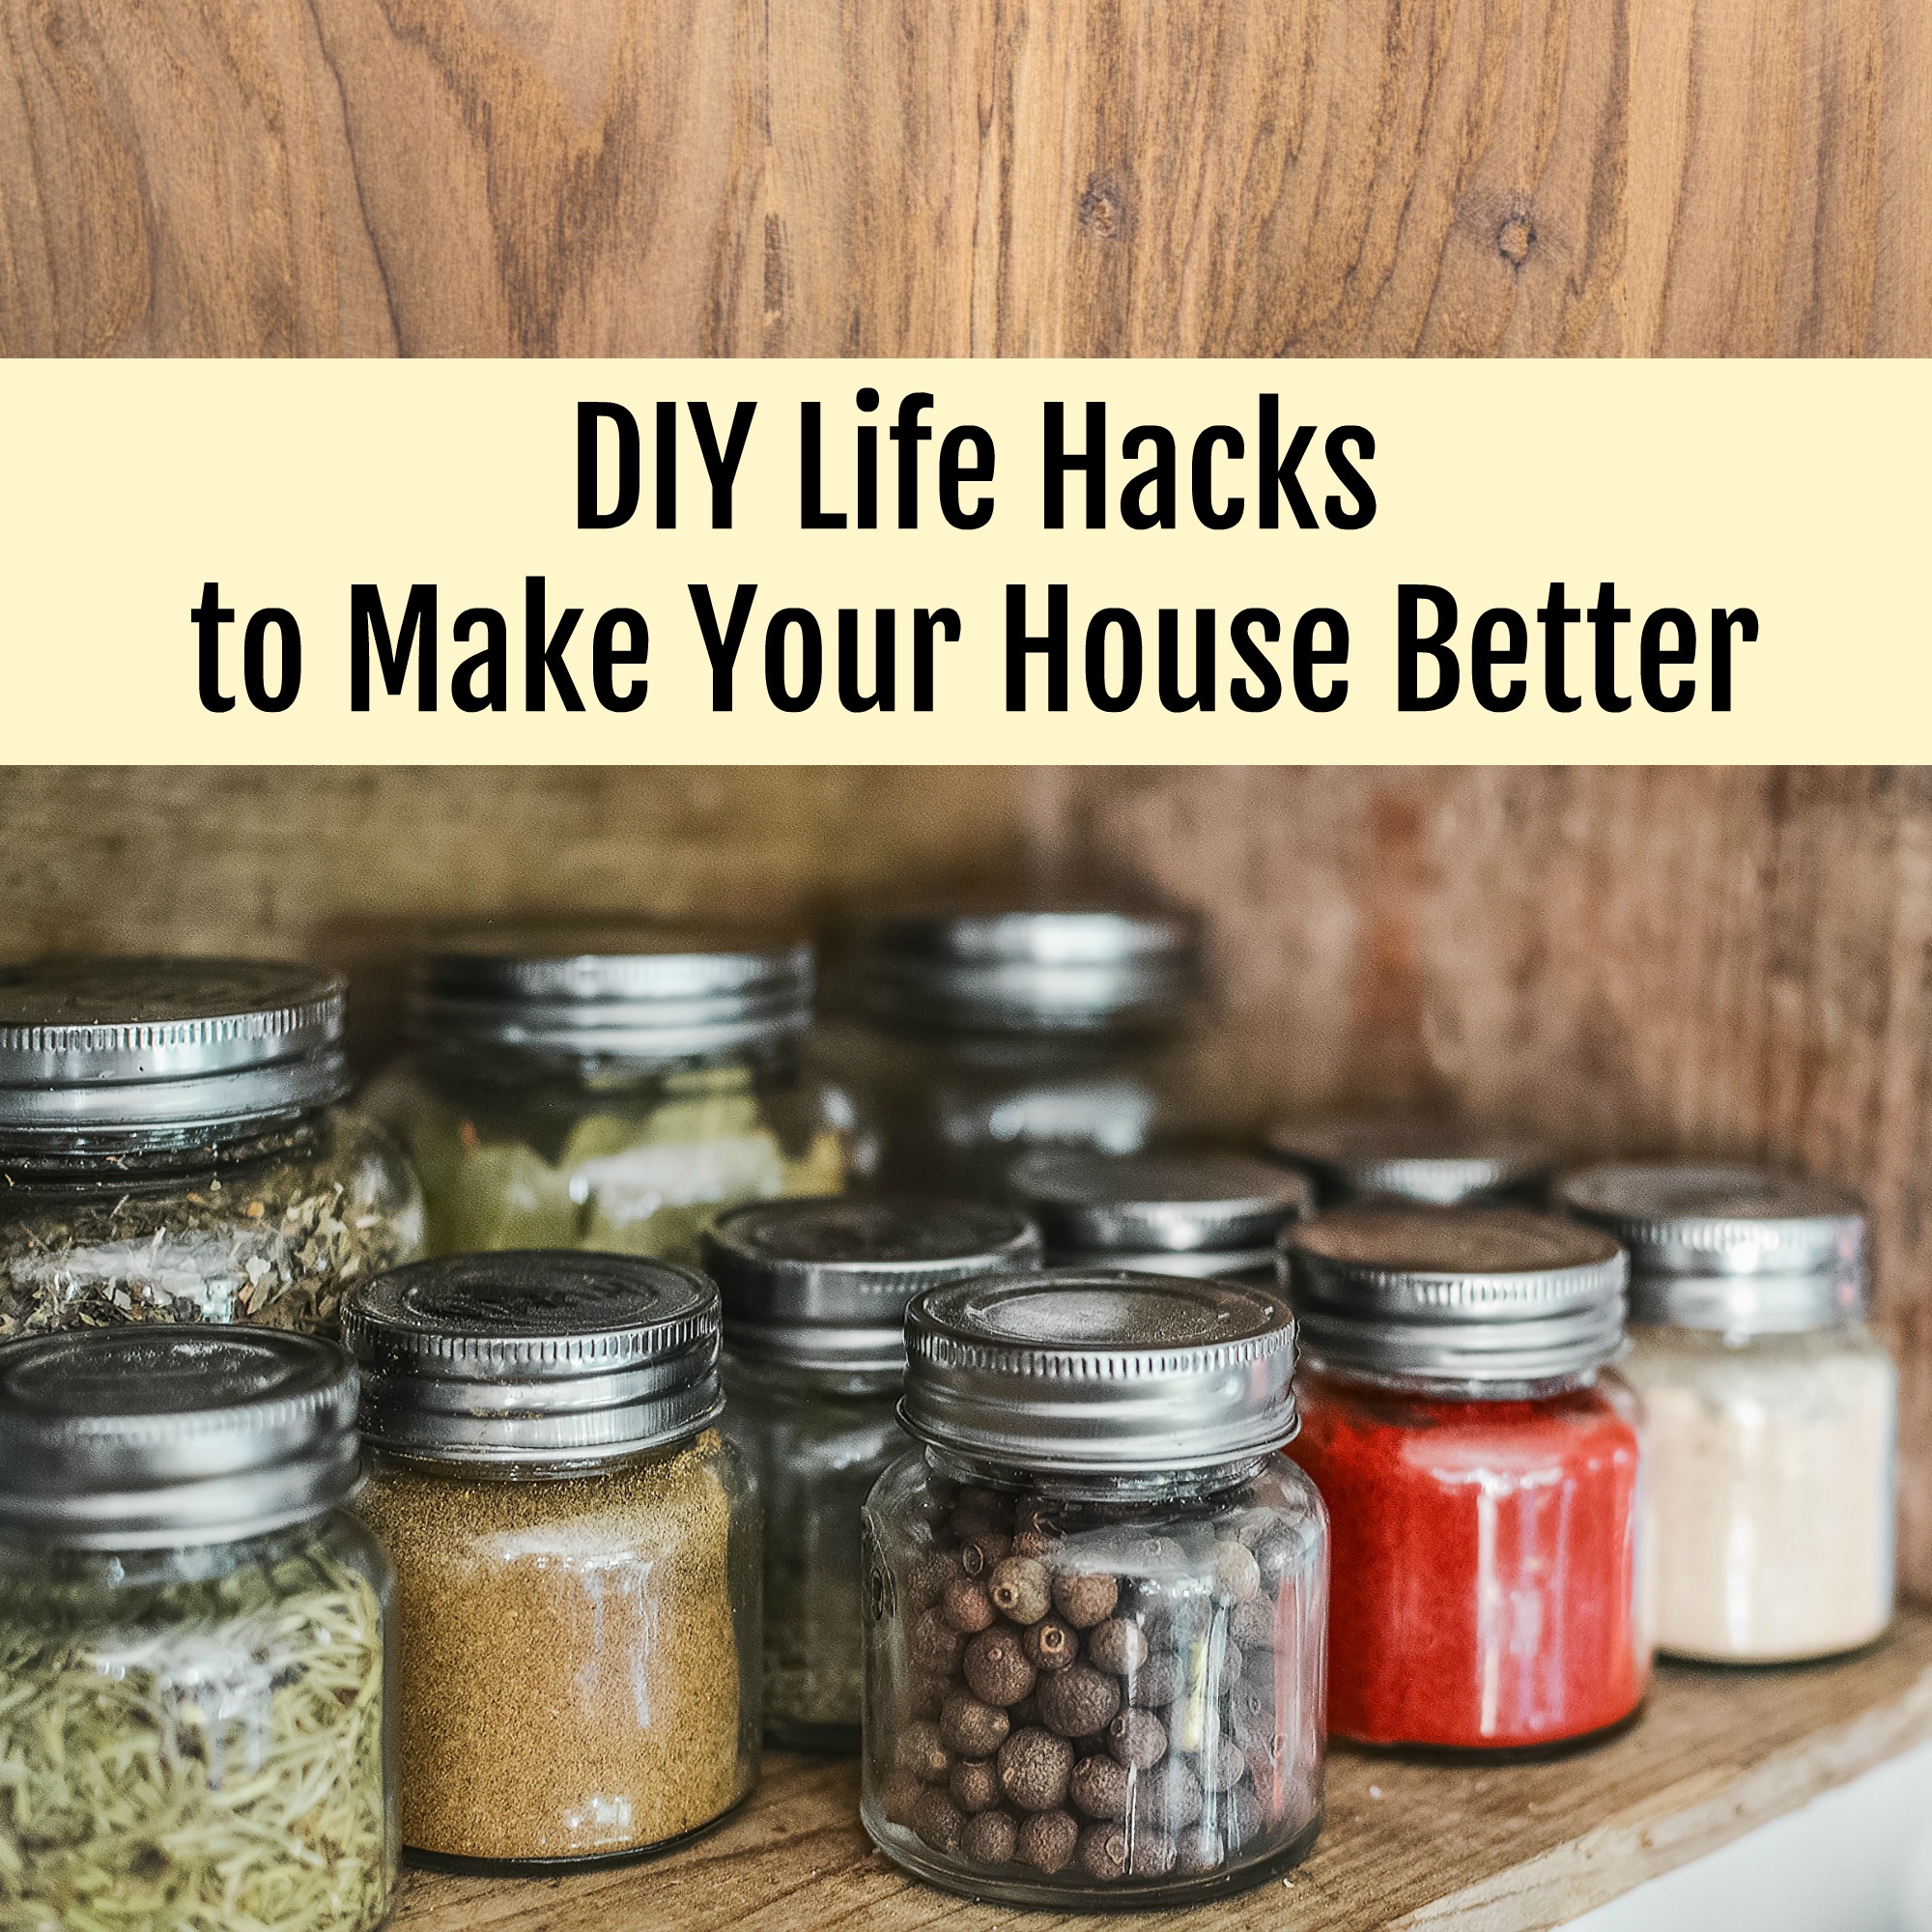 DIY Life Hacks to Make Your House Better